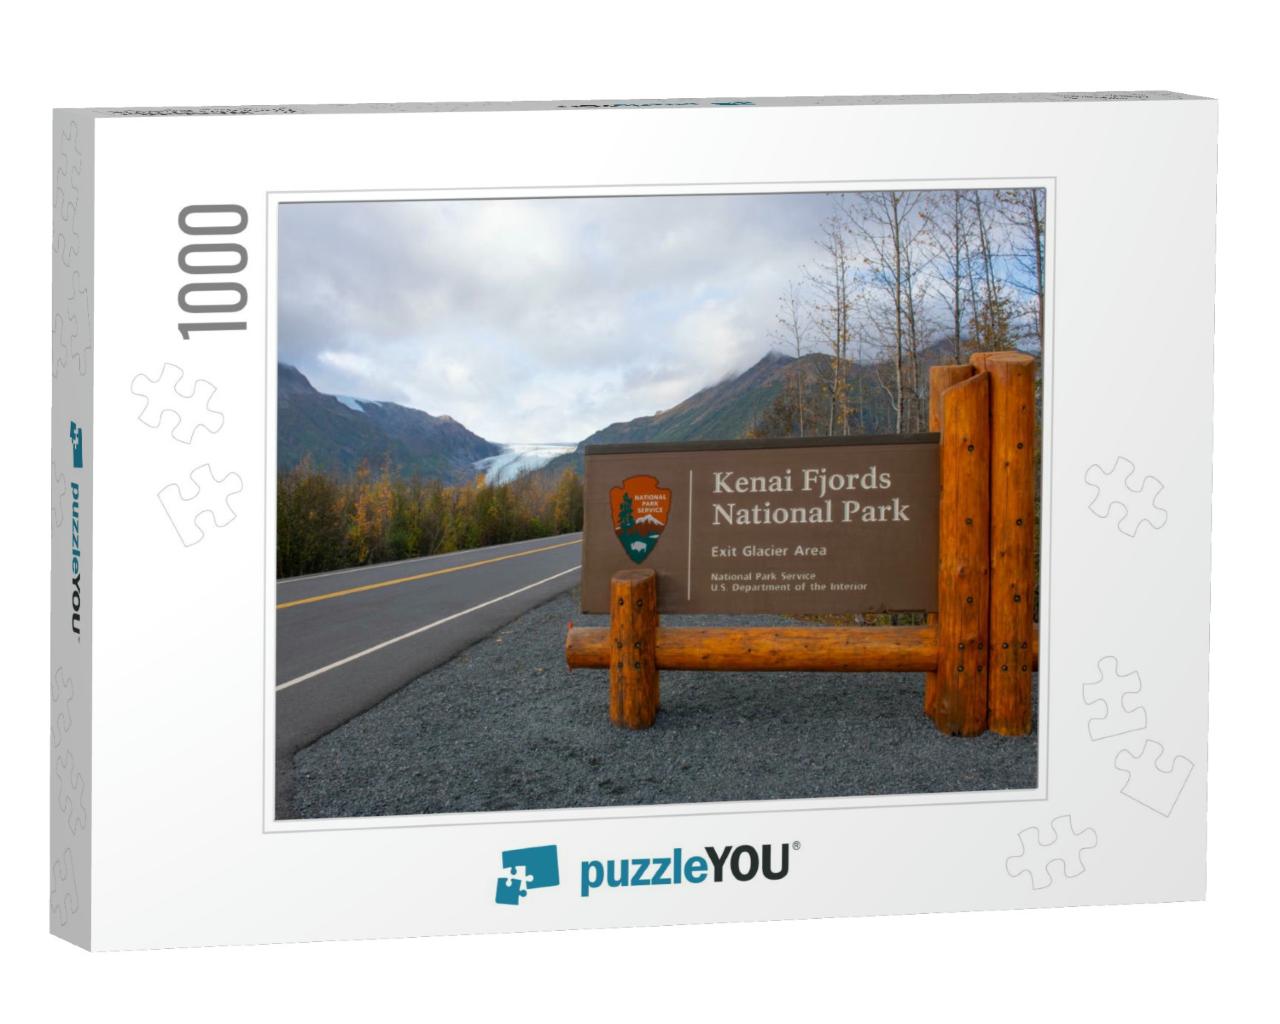 Entrance Sign Near Exit Glacier in Kenai Fjords National... Jigsaw Puzzle with 1000 pieces